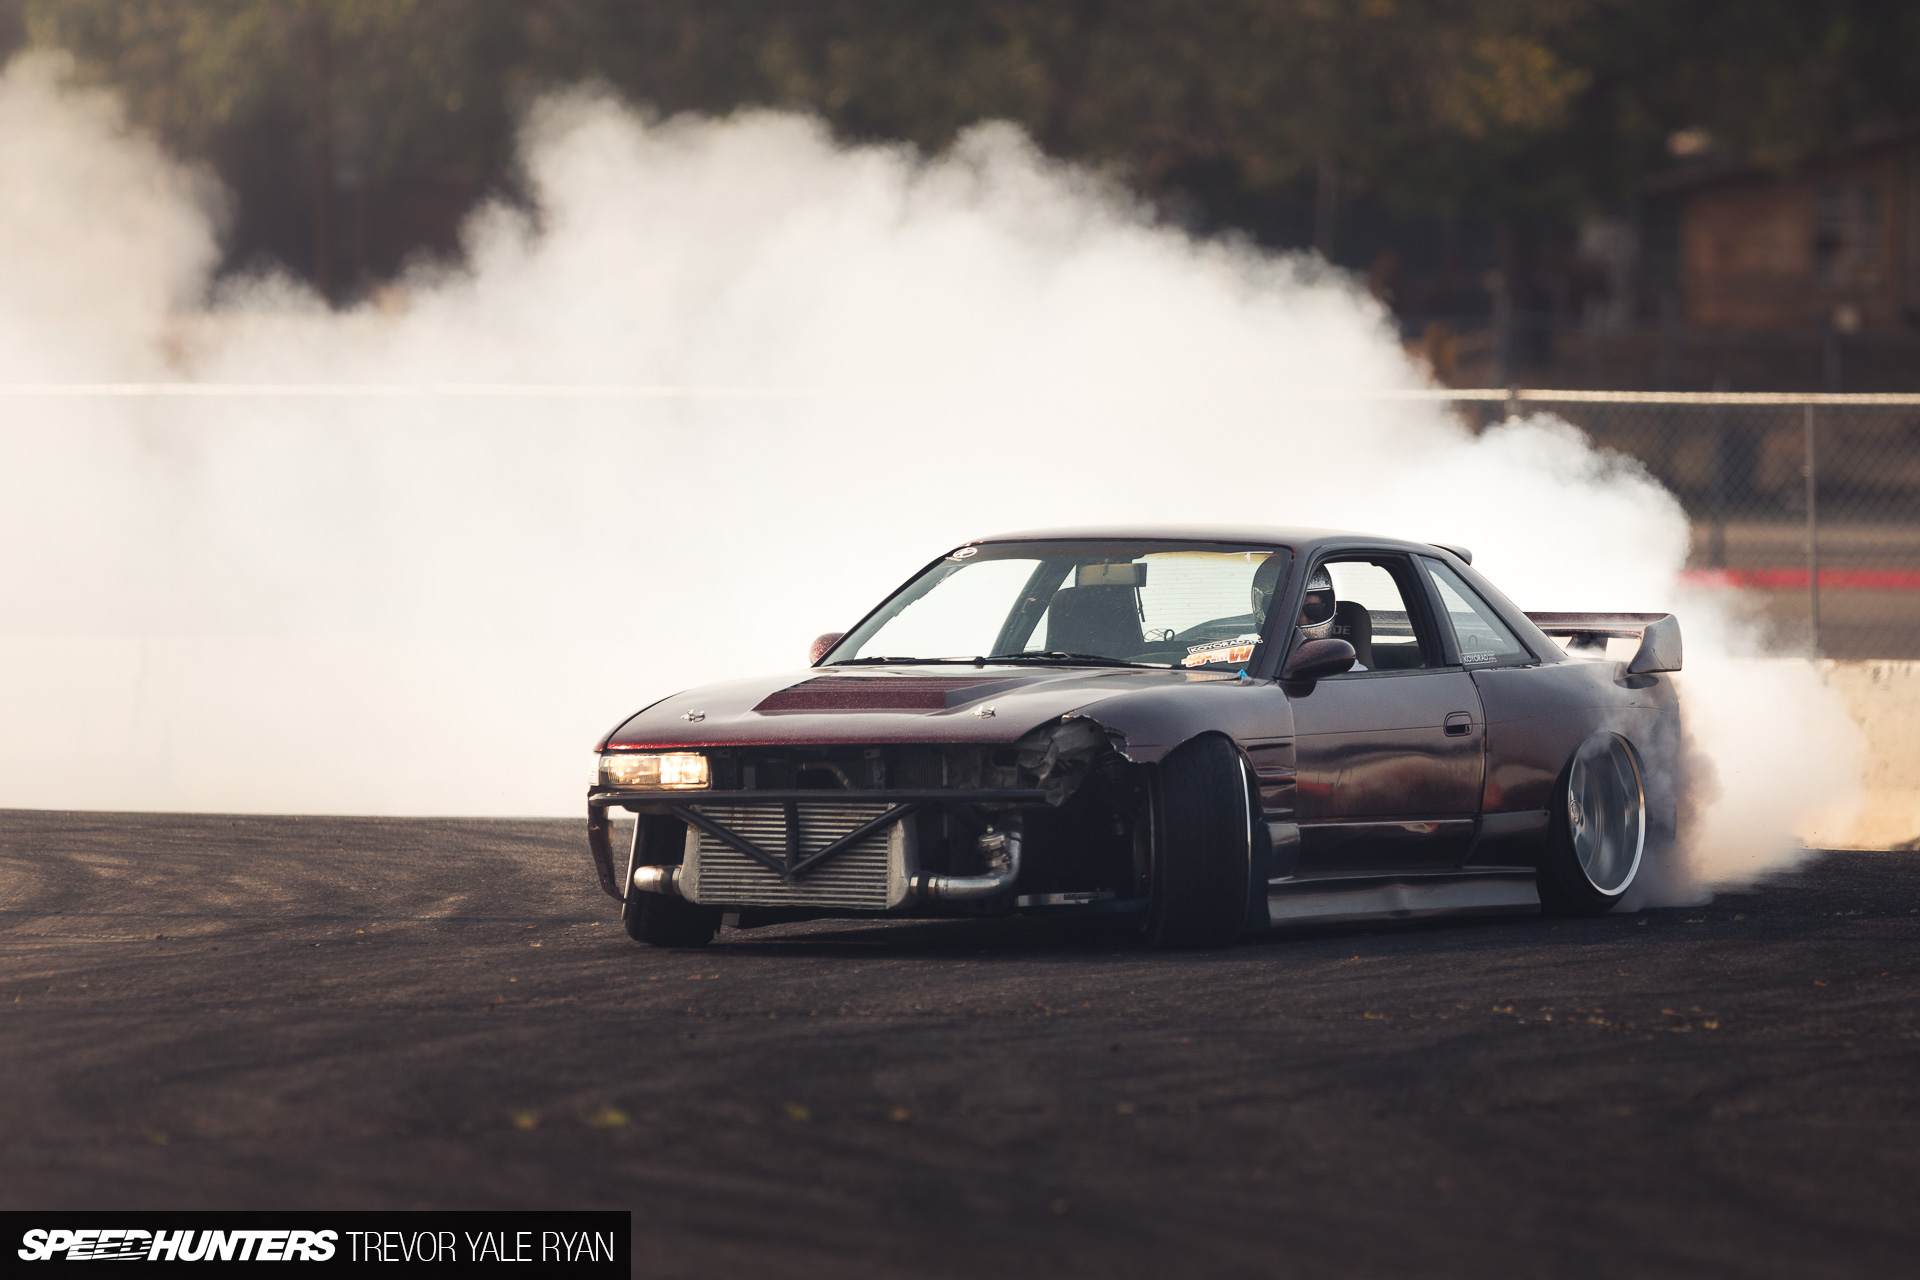 The Guy Bringing Drifting To Hot August Nights Speedhunters